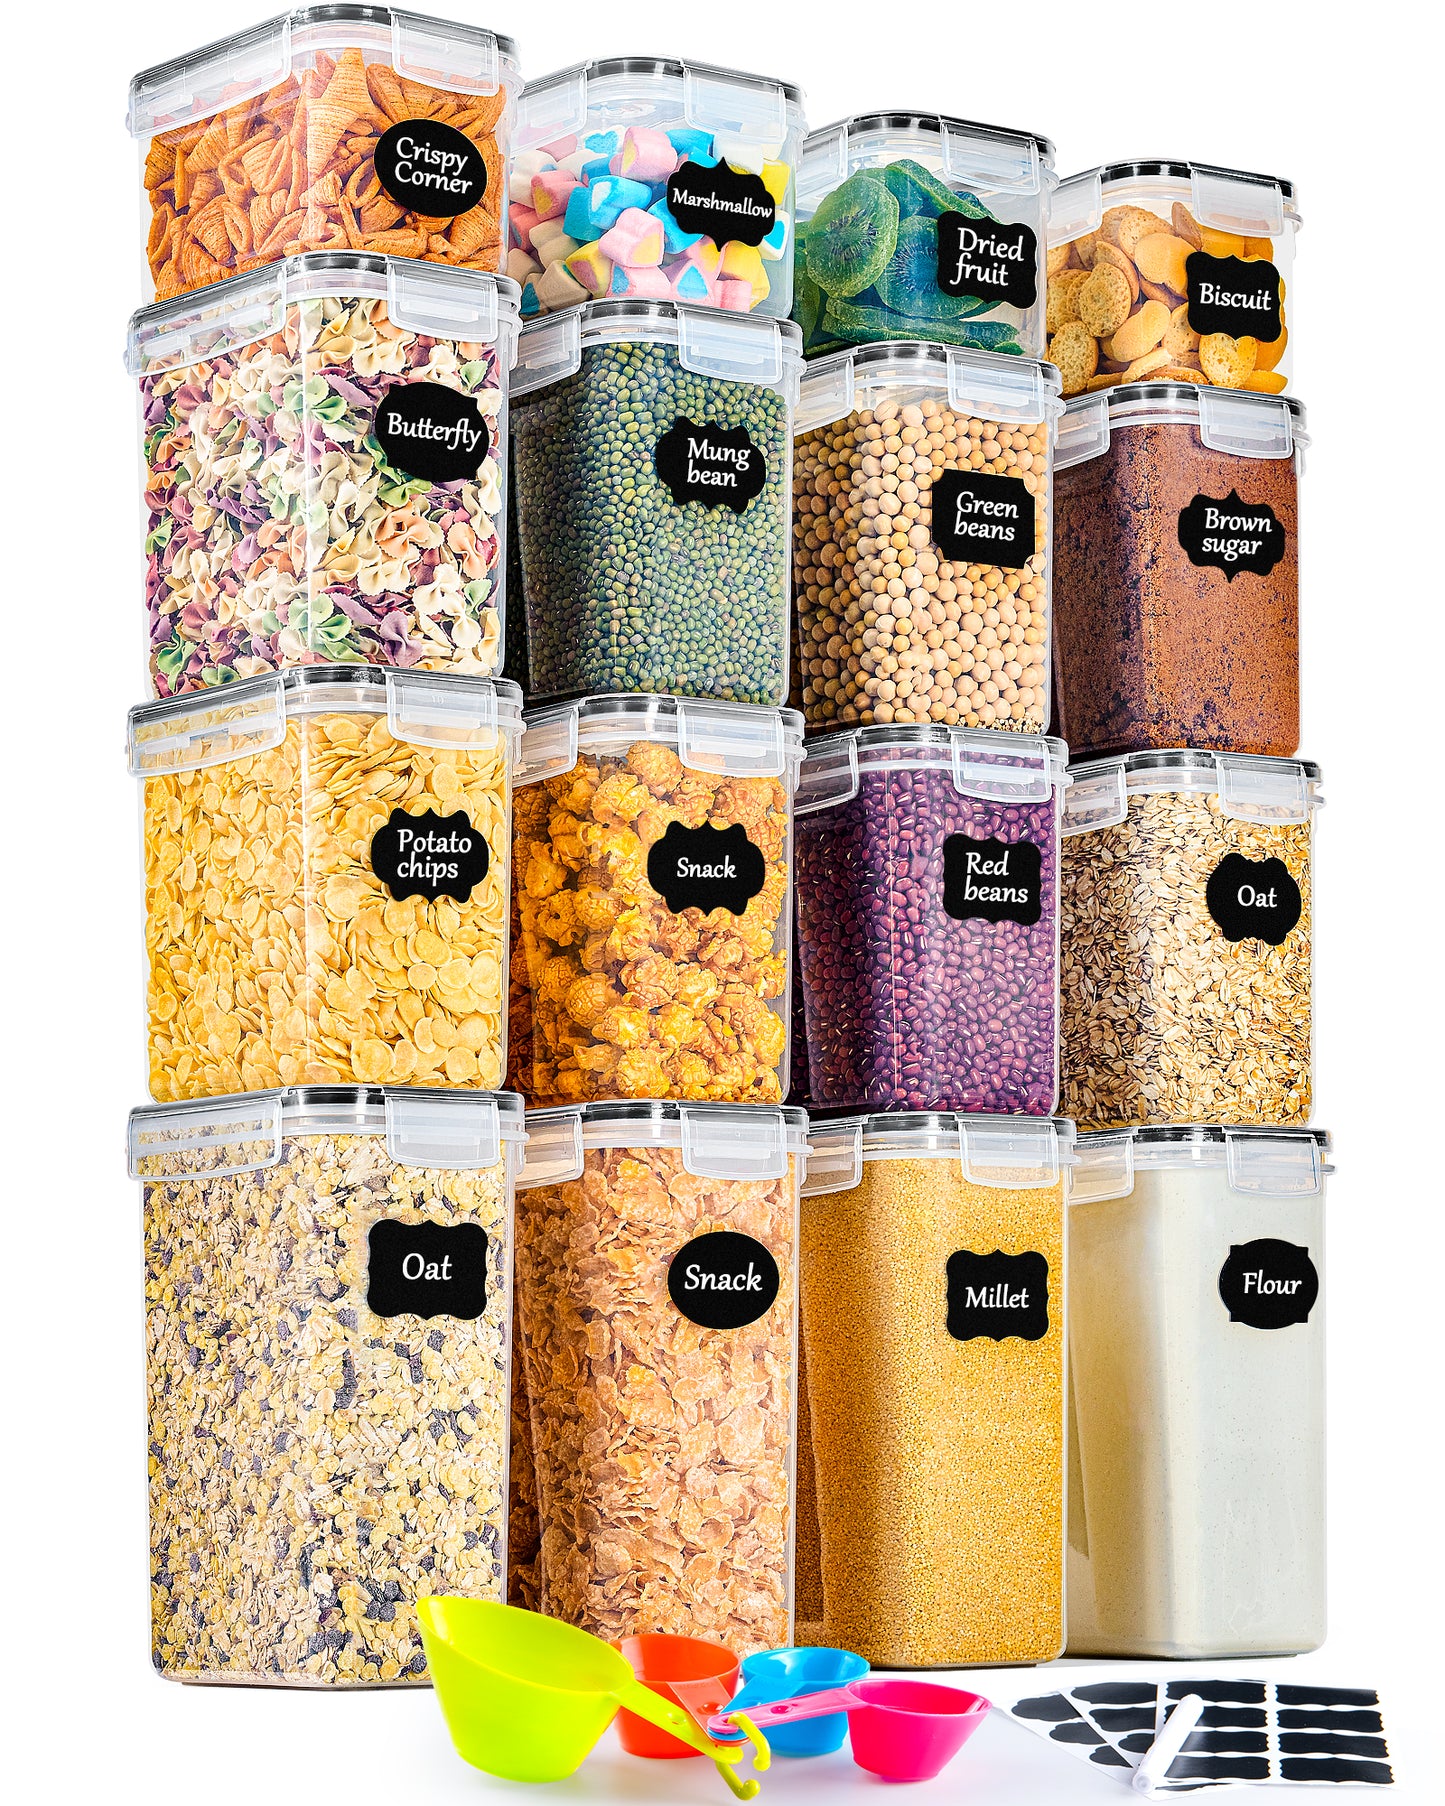 GoMaihe Cereal Storage Containers Set of 16